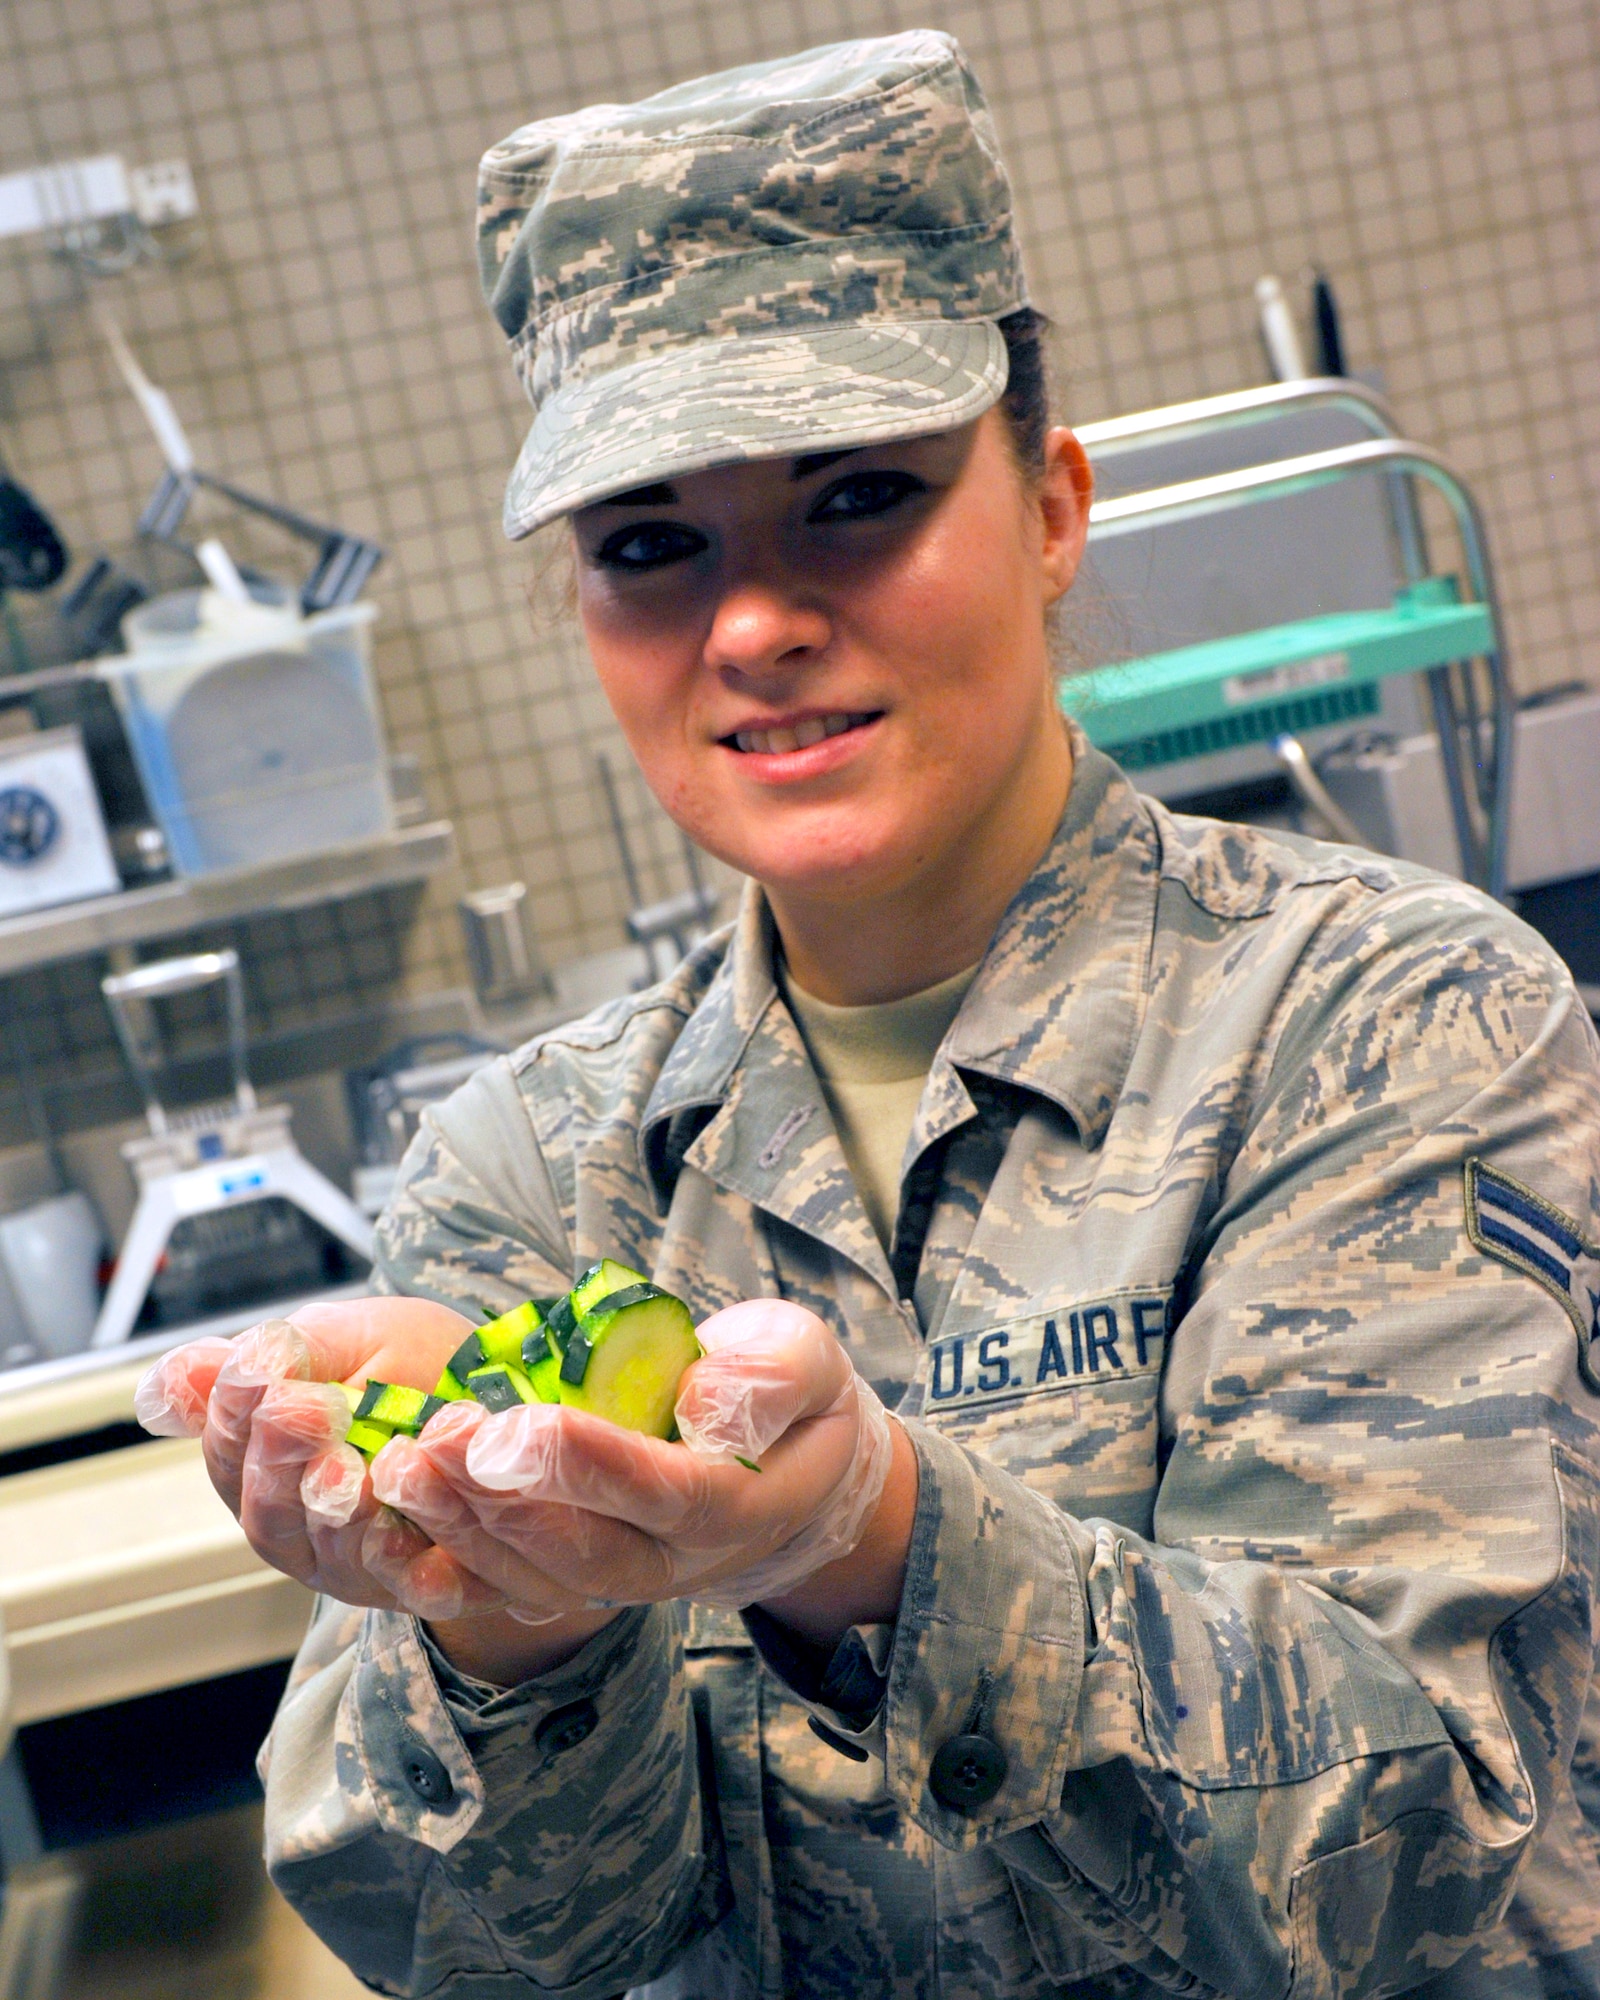 Airman 1st Class Jennifer Wascher, 56th FSS food service journeyman, takes a moment to showcase her cucumber cutting technique July 13, 2017 at Luke Air Force Base, Ariz. Wascher was one of the five Airman who attending a Chef Mentoring Program outside of Luke. (U.S. Air Force photo by Airman 1st Class Pedro Mota)